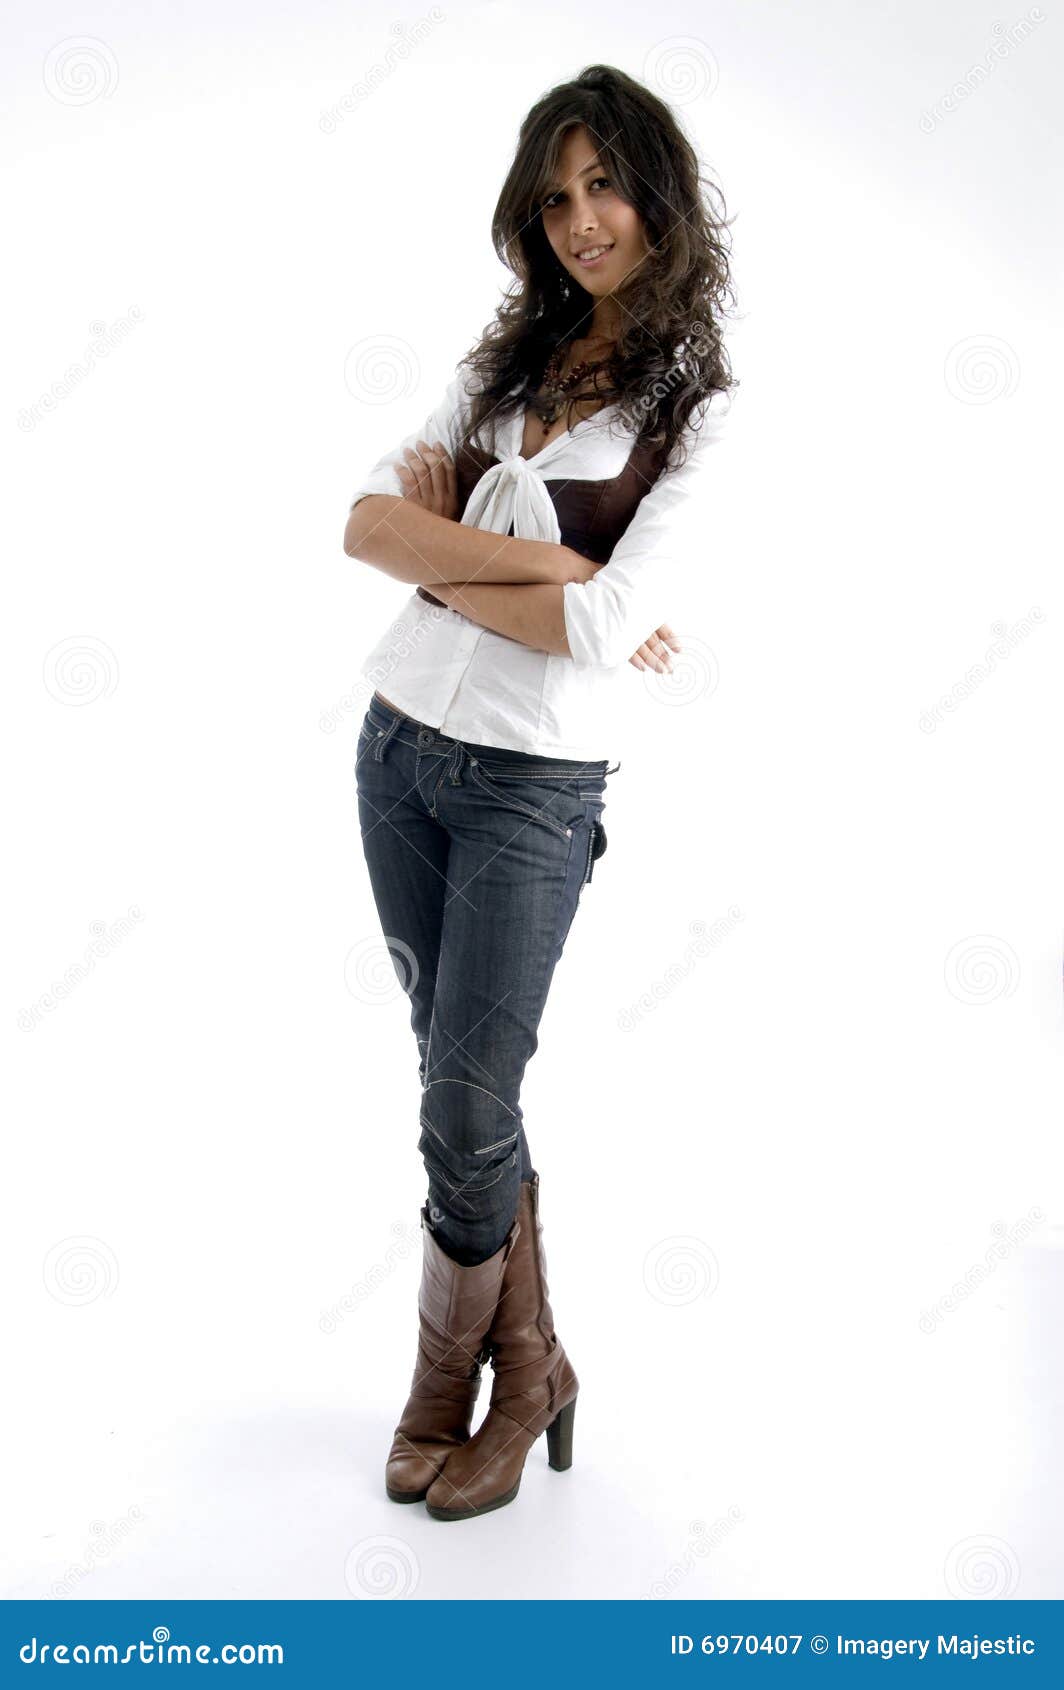 Young Model Posing With Her Arms Crossed Royalty Free Stock Photography